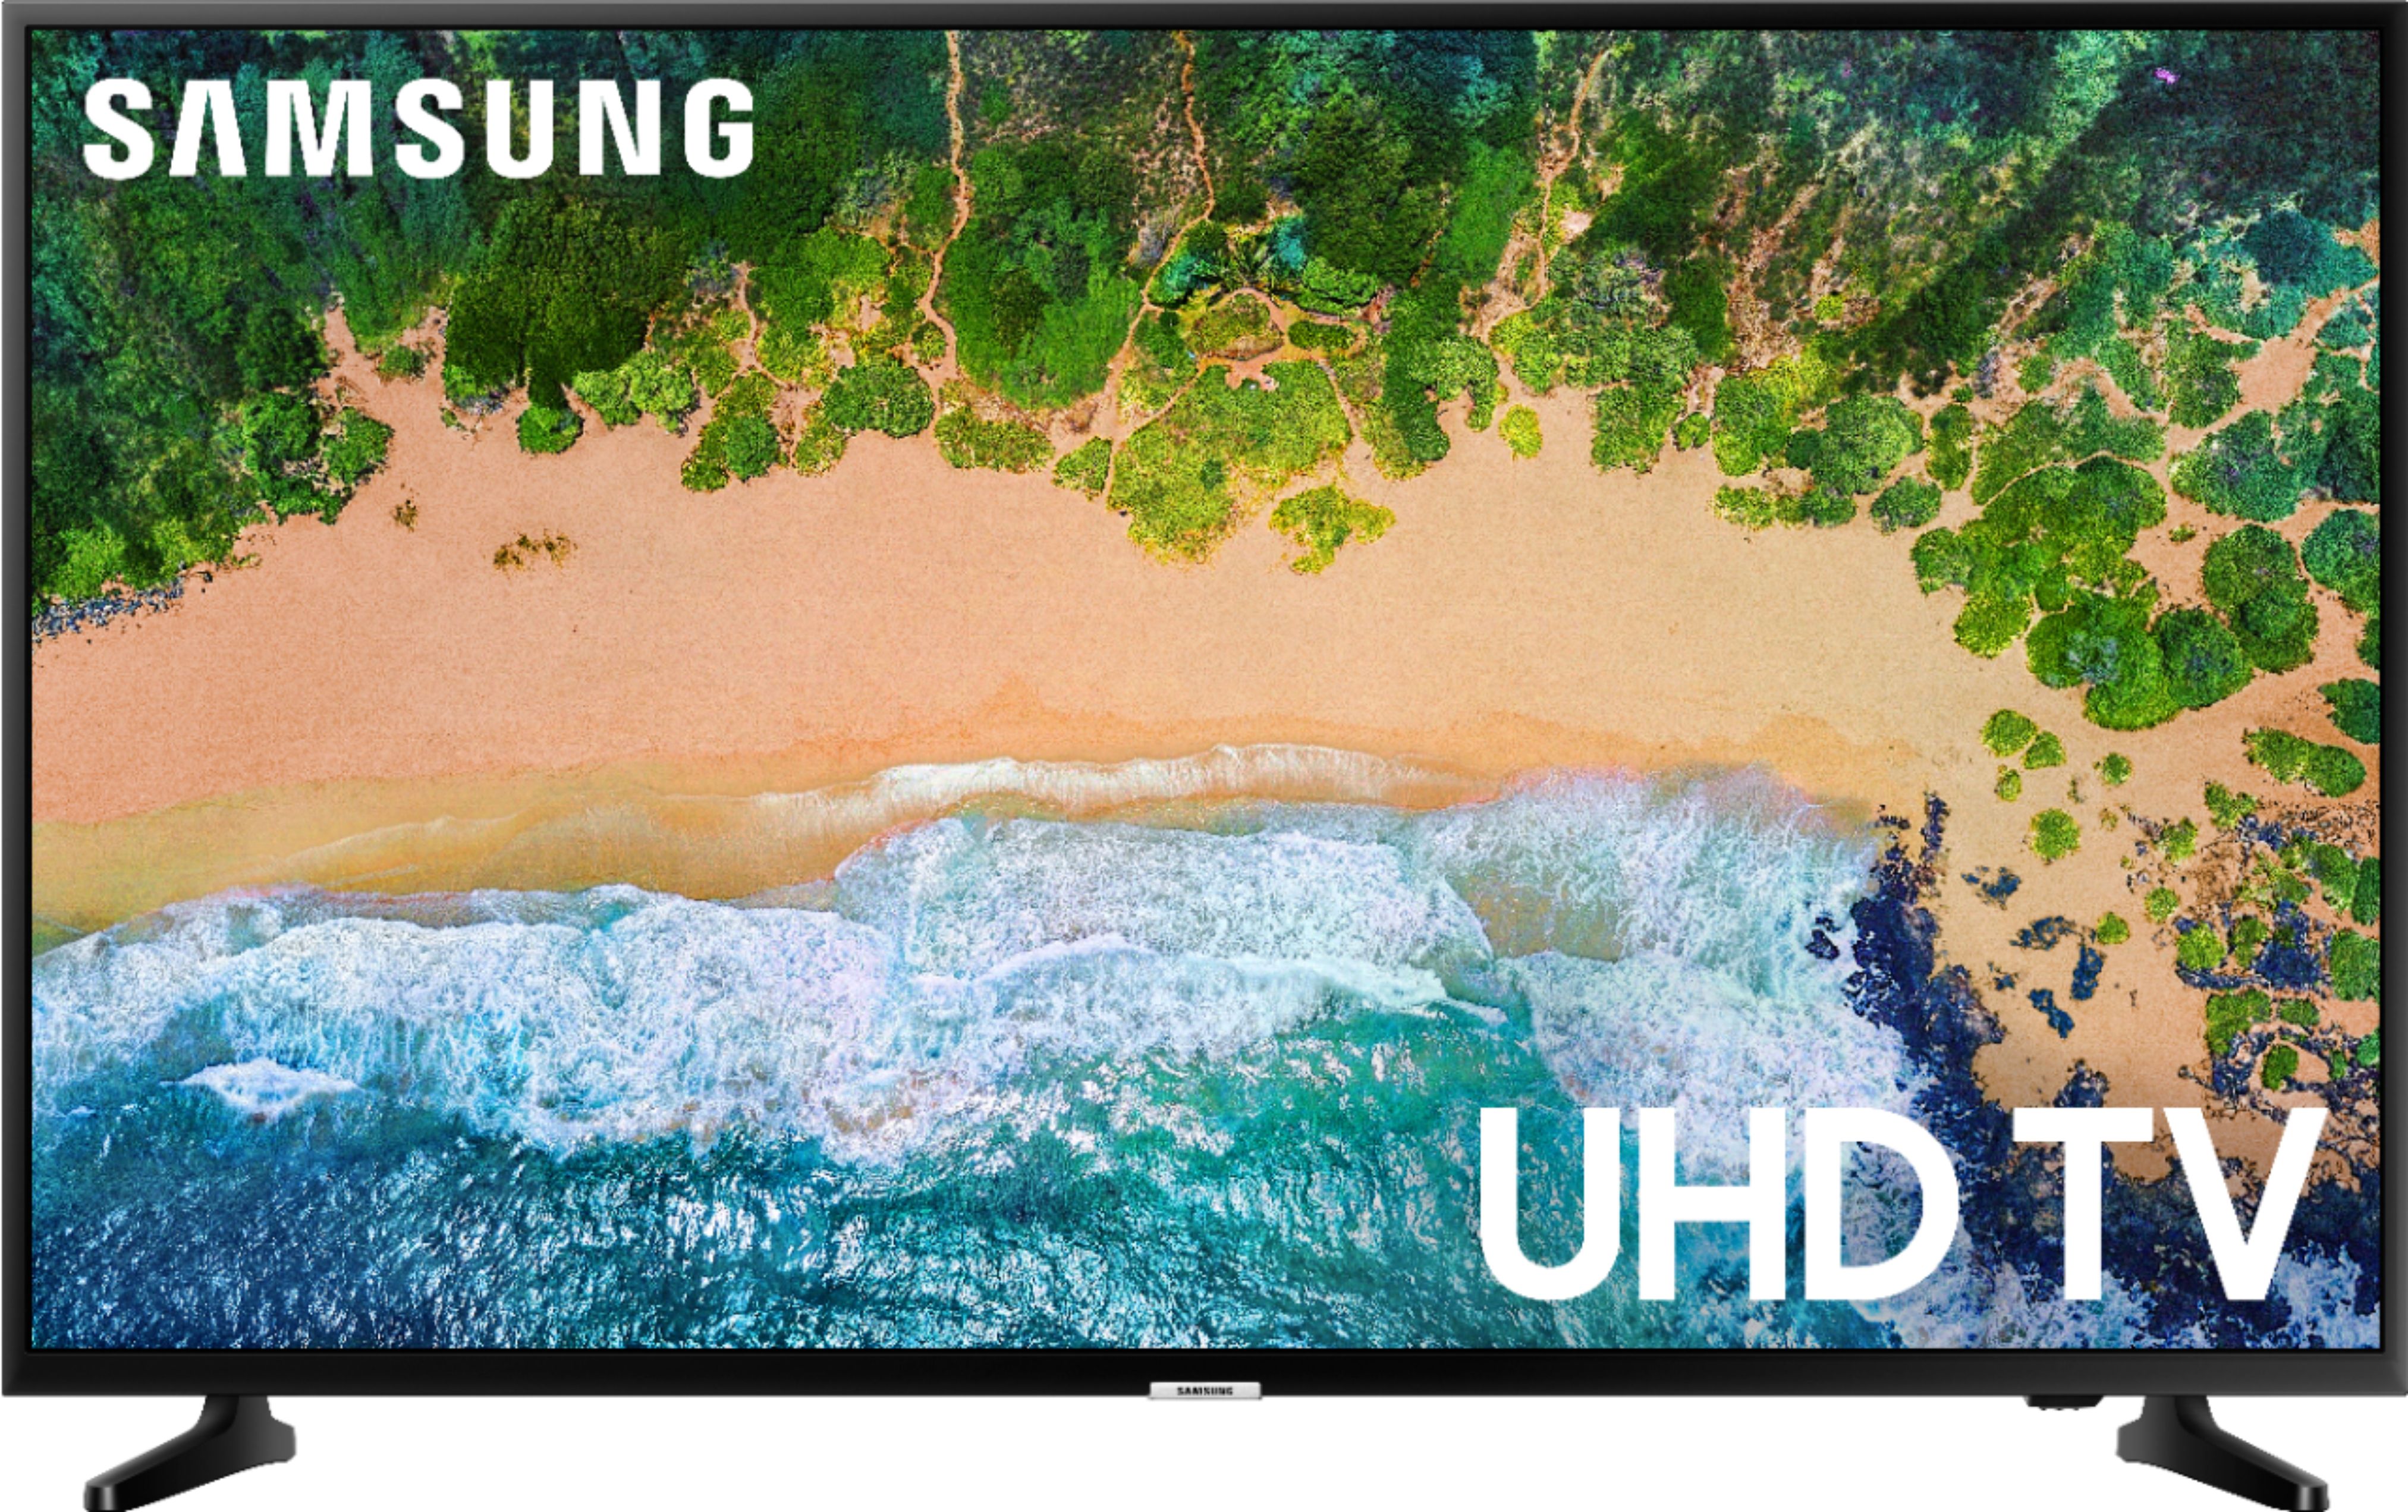 Zoom in on Front Zoom. Samsung - 50" Class NU6900 Series LED 4K UHD Smart Tizen TV.